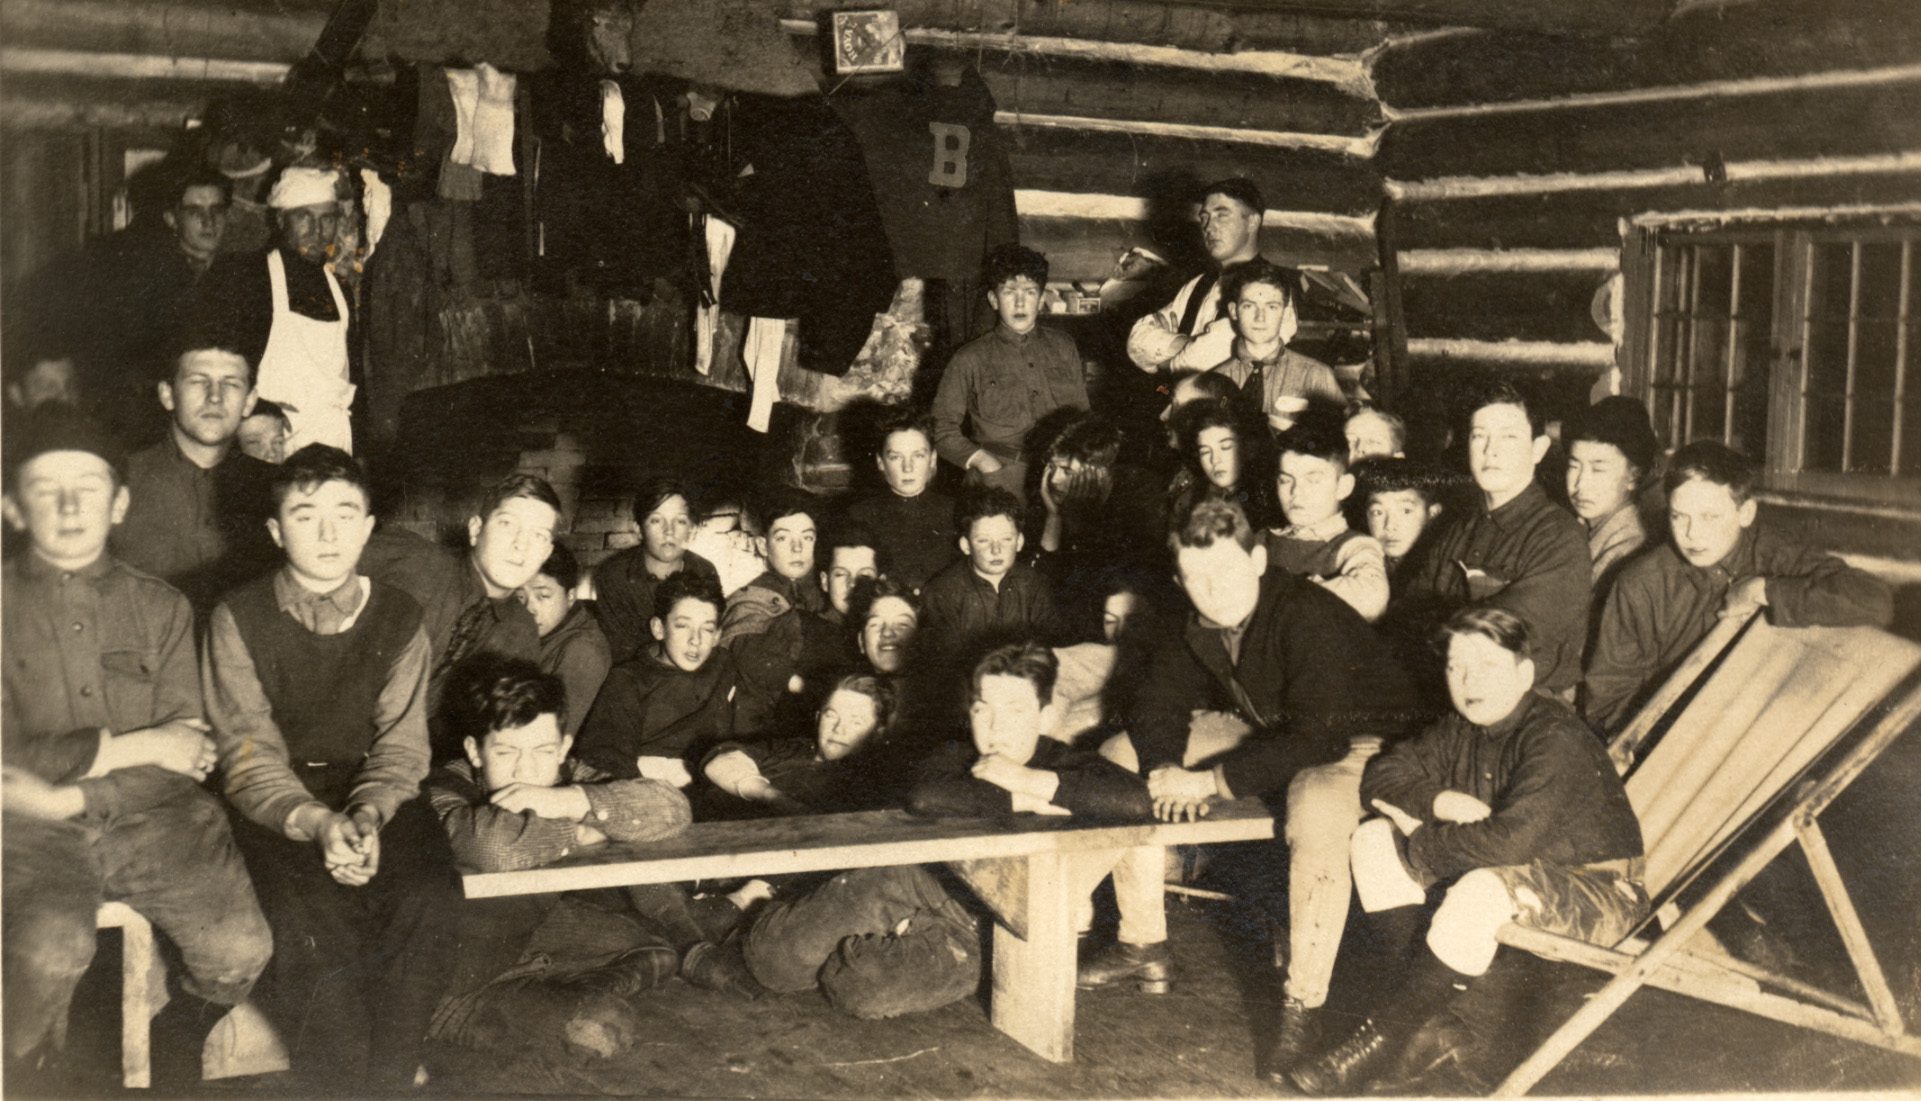 Youth in sweaters crowd in front of a large fireplace, sitting on anything. Clothes hang over the fire drying. Several leaders stand in the back, including one in apron and chef's hat. George Nakashima is on the far right.